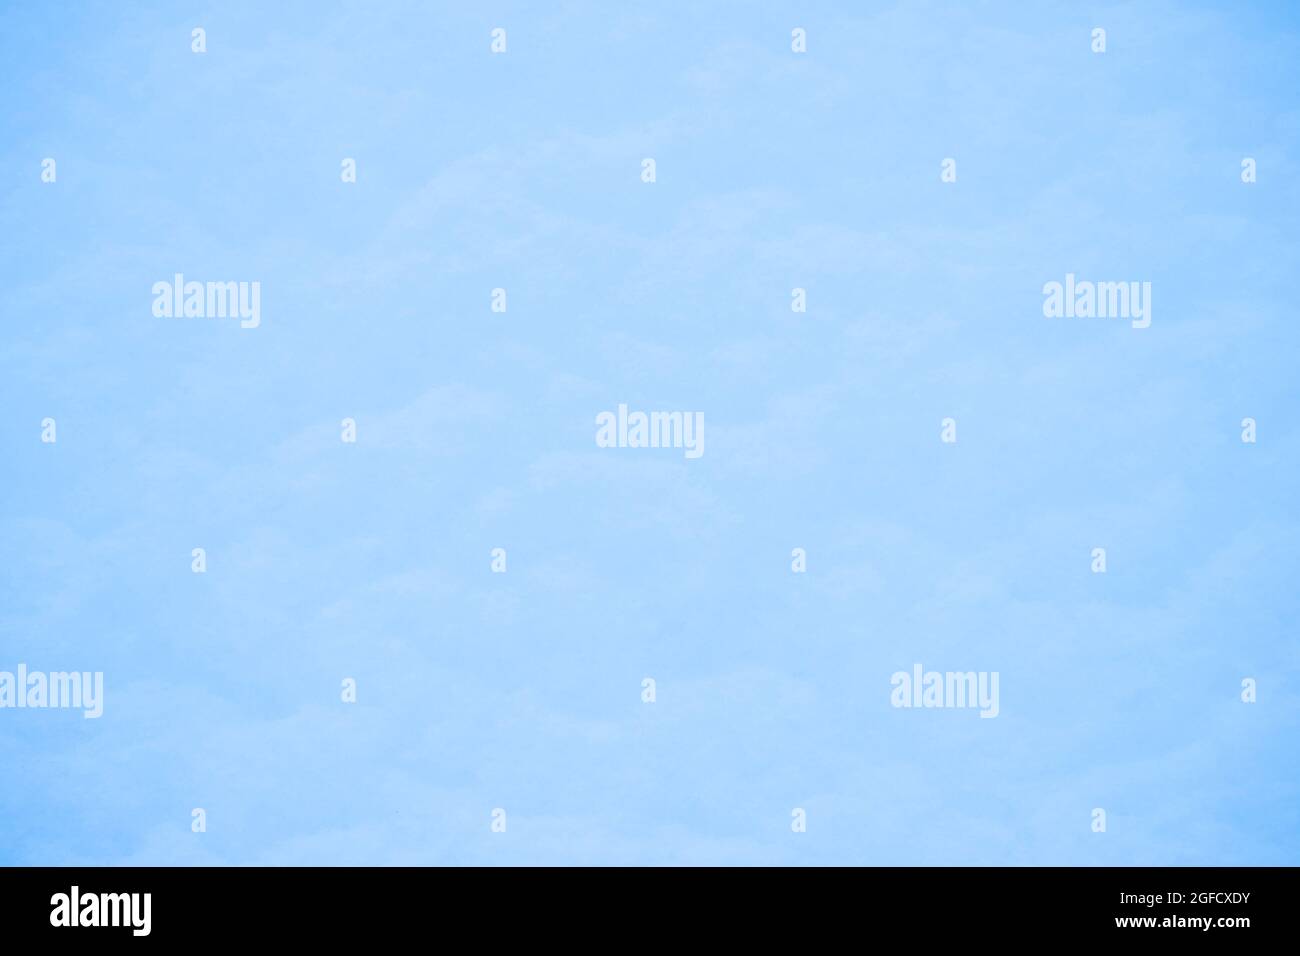 Abstract blue banner background for design and advertising. Stock Photo